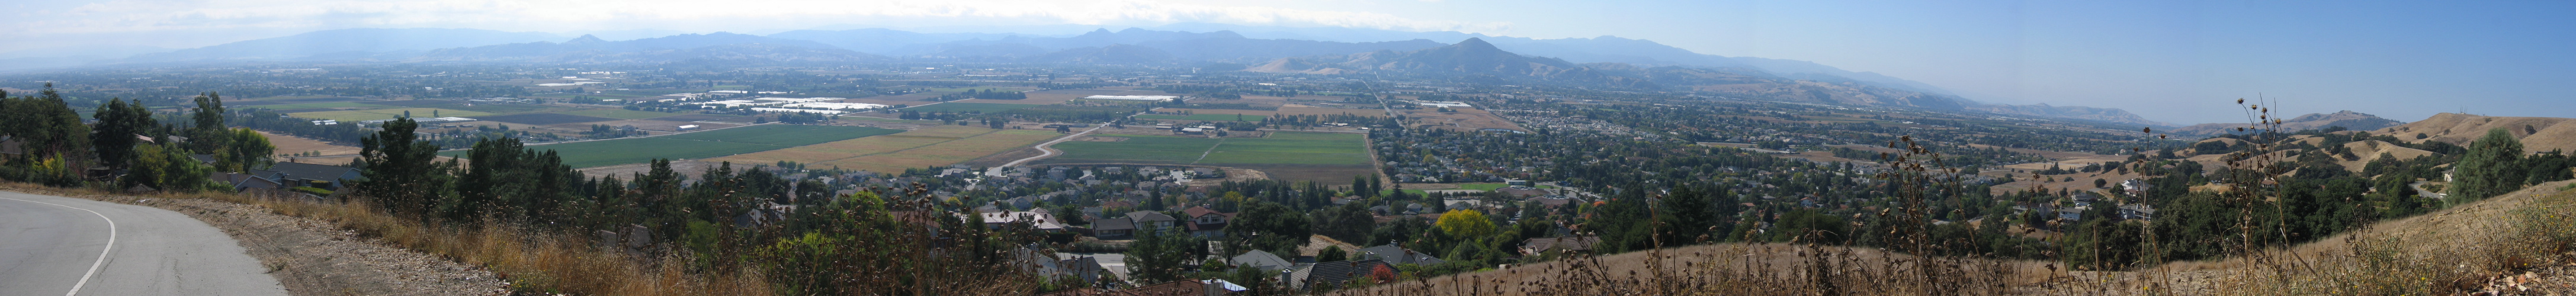 Santa Clara Valley Panorama from East Dunne Ave., Morgan Hill. (760ft)